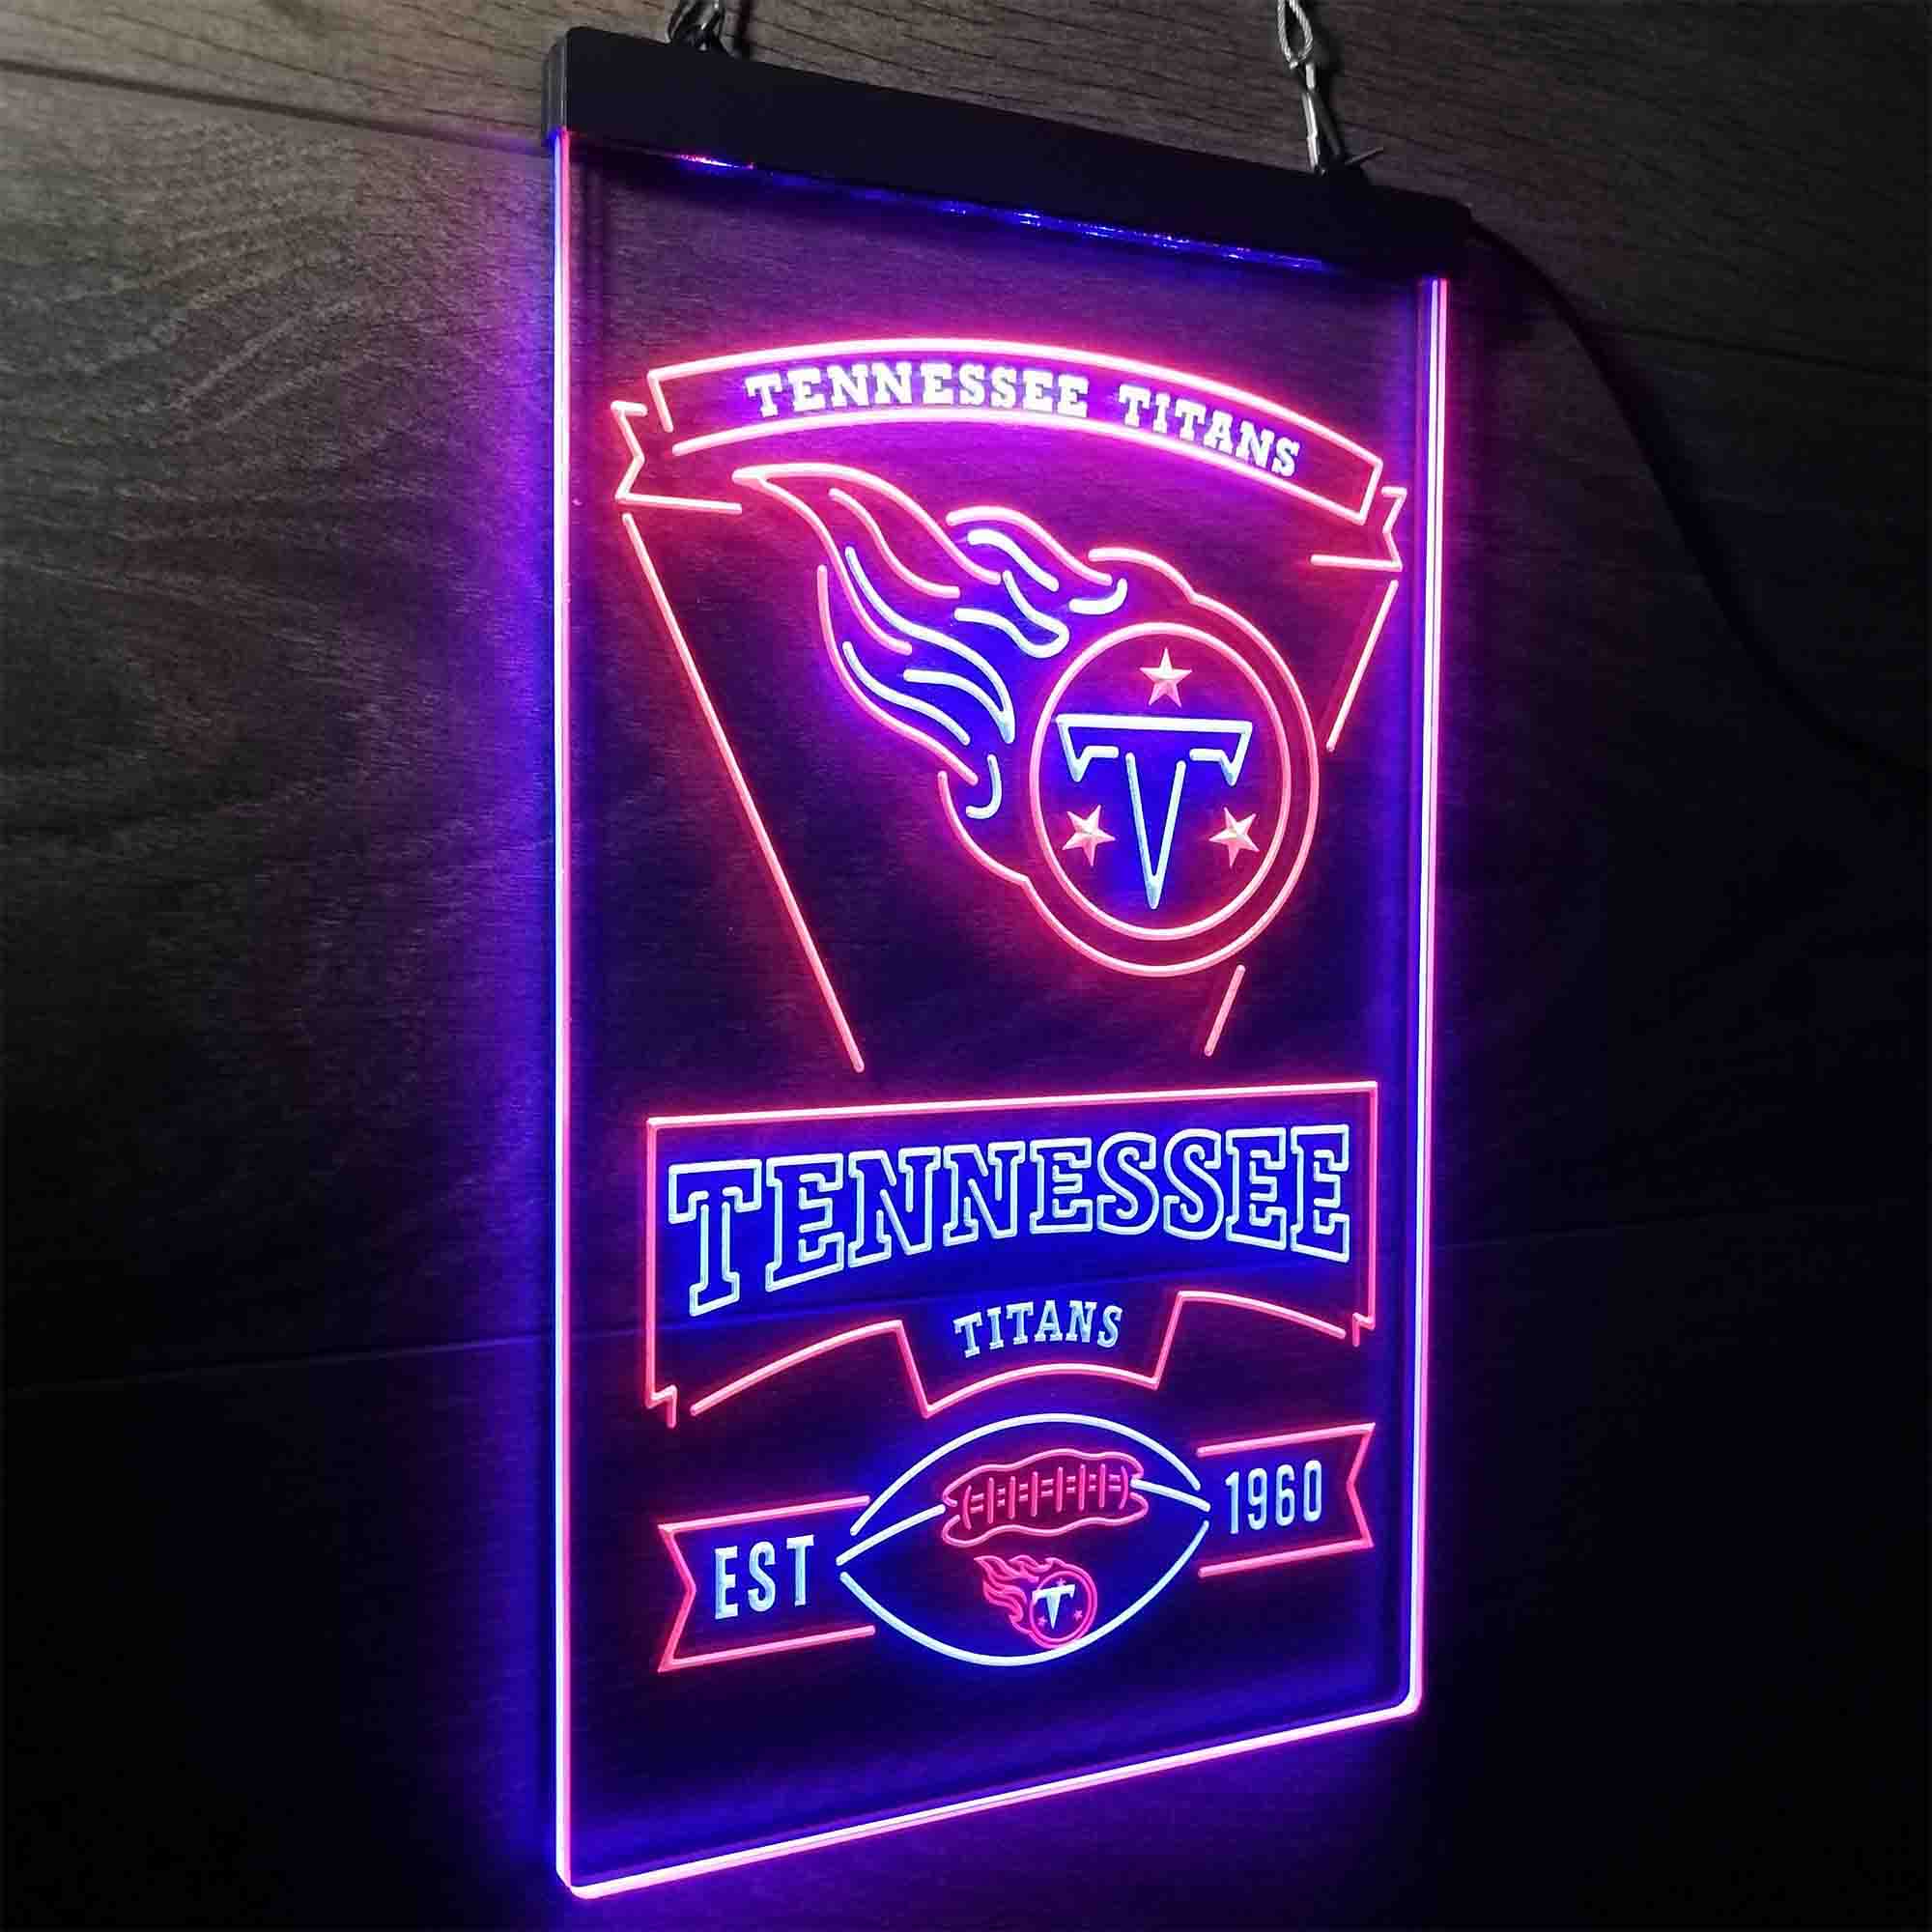 Tennessee Titans Est. 1960 LED Neon Sign